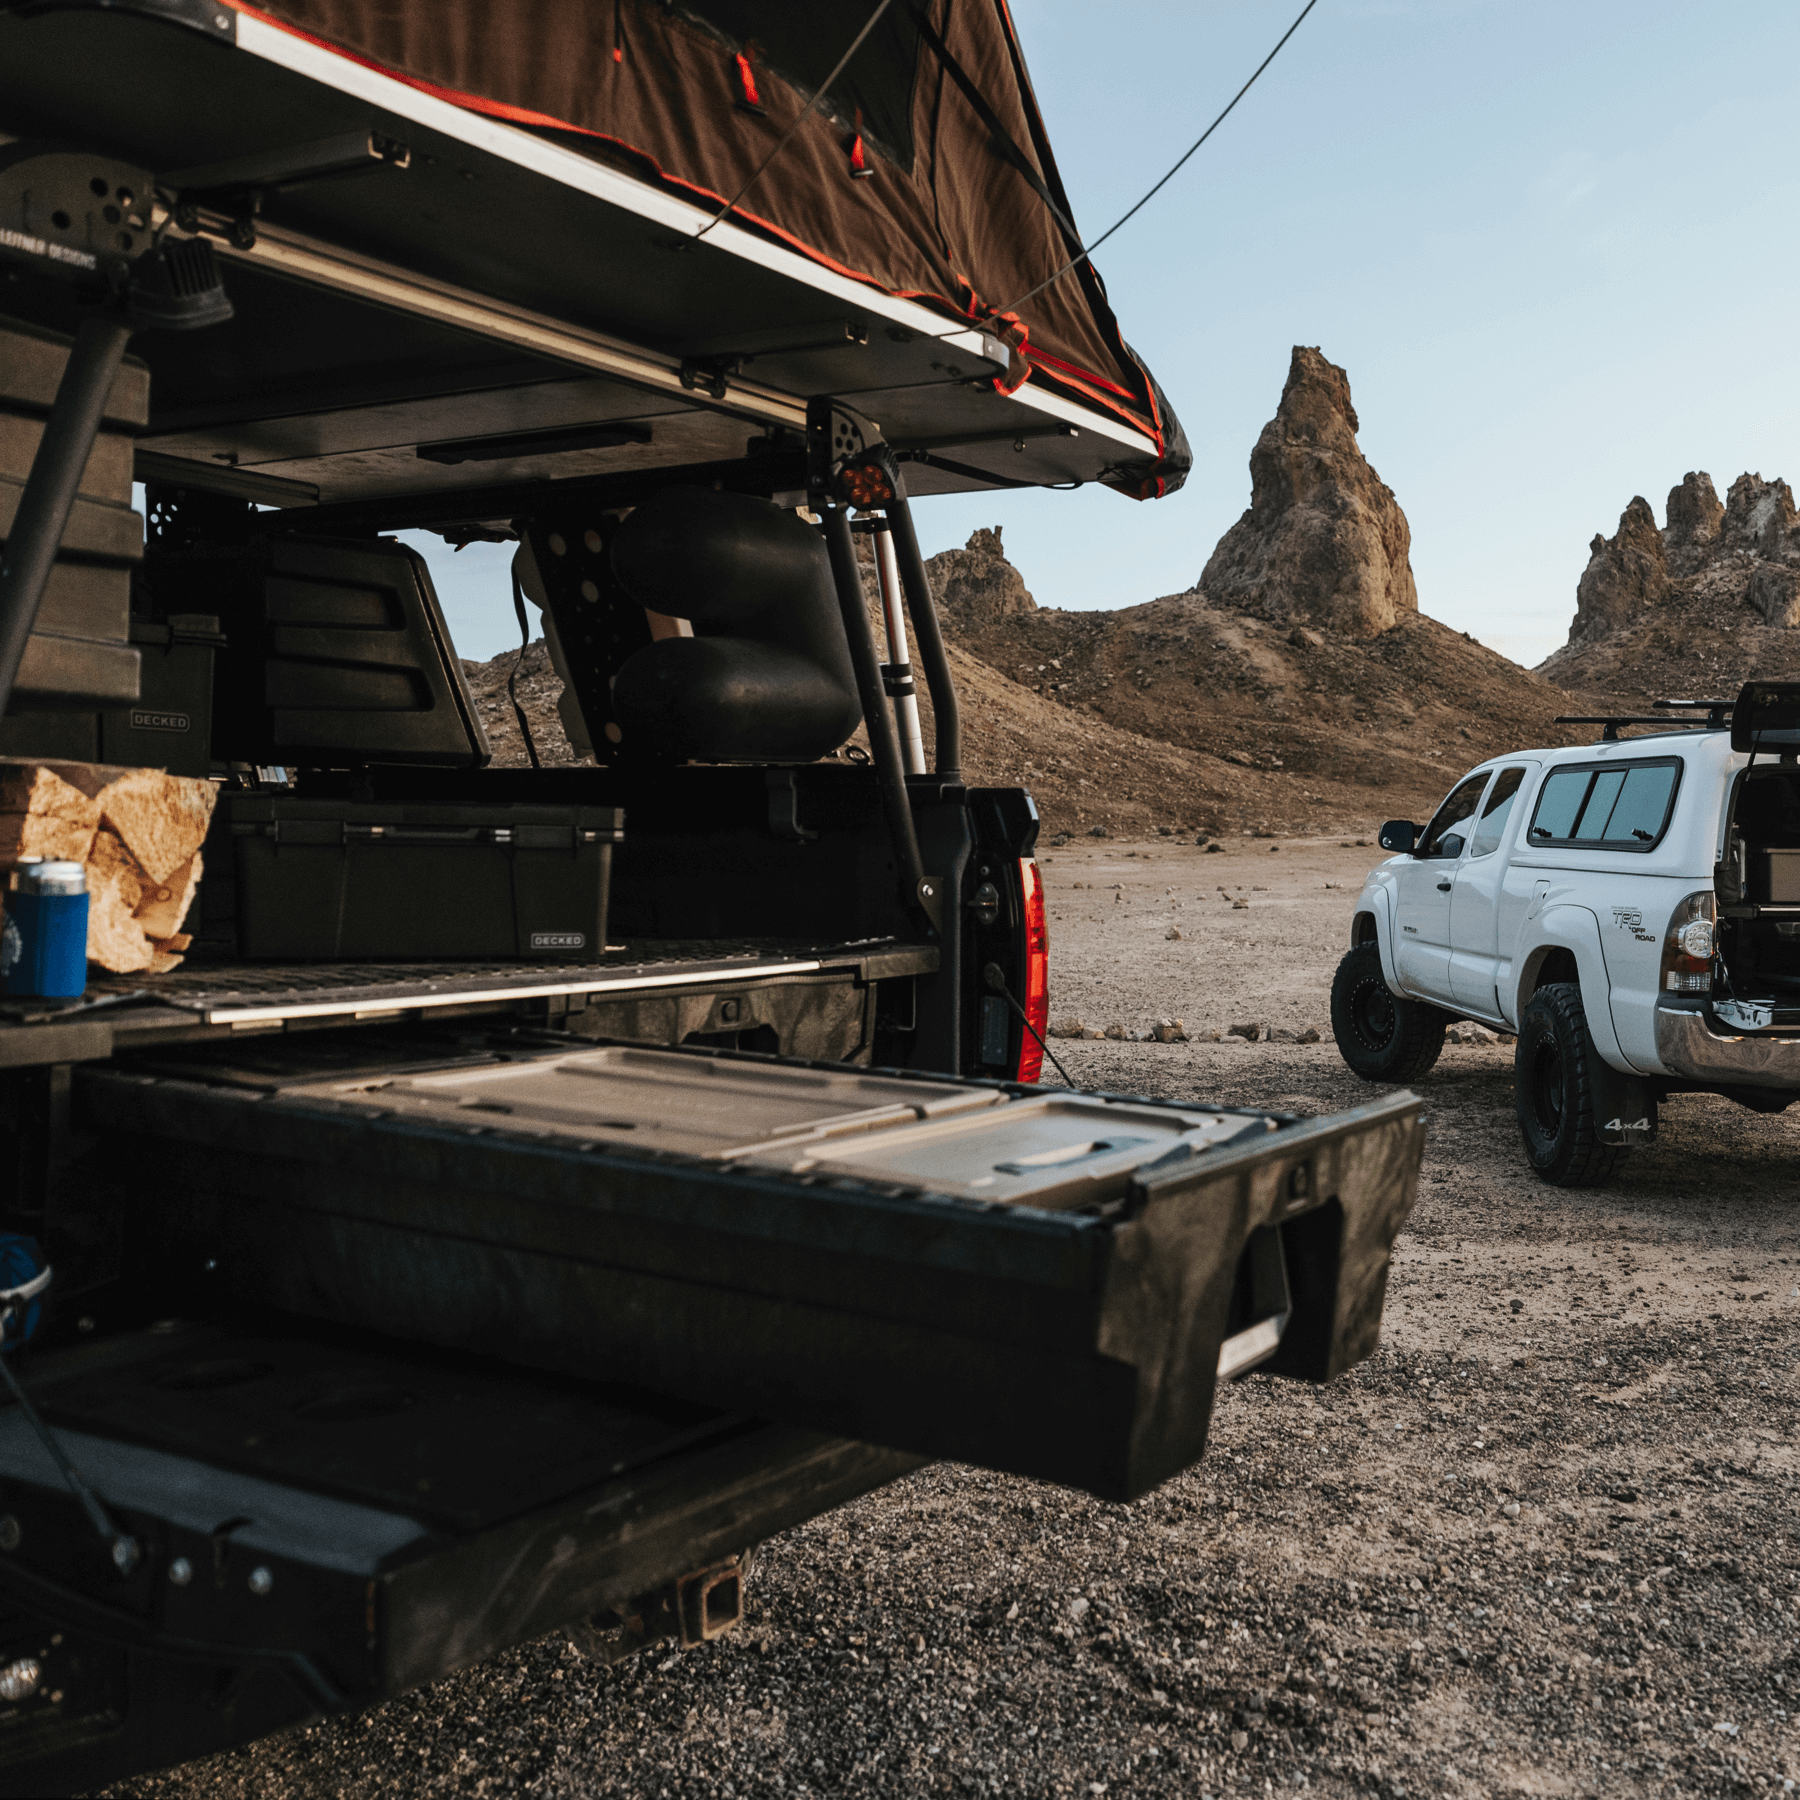 Trucks in the desert with Drawer Systems open.